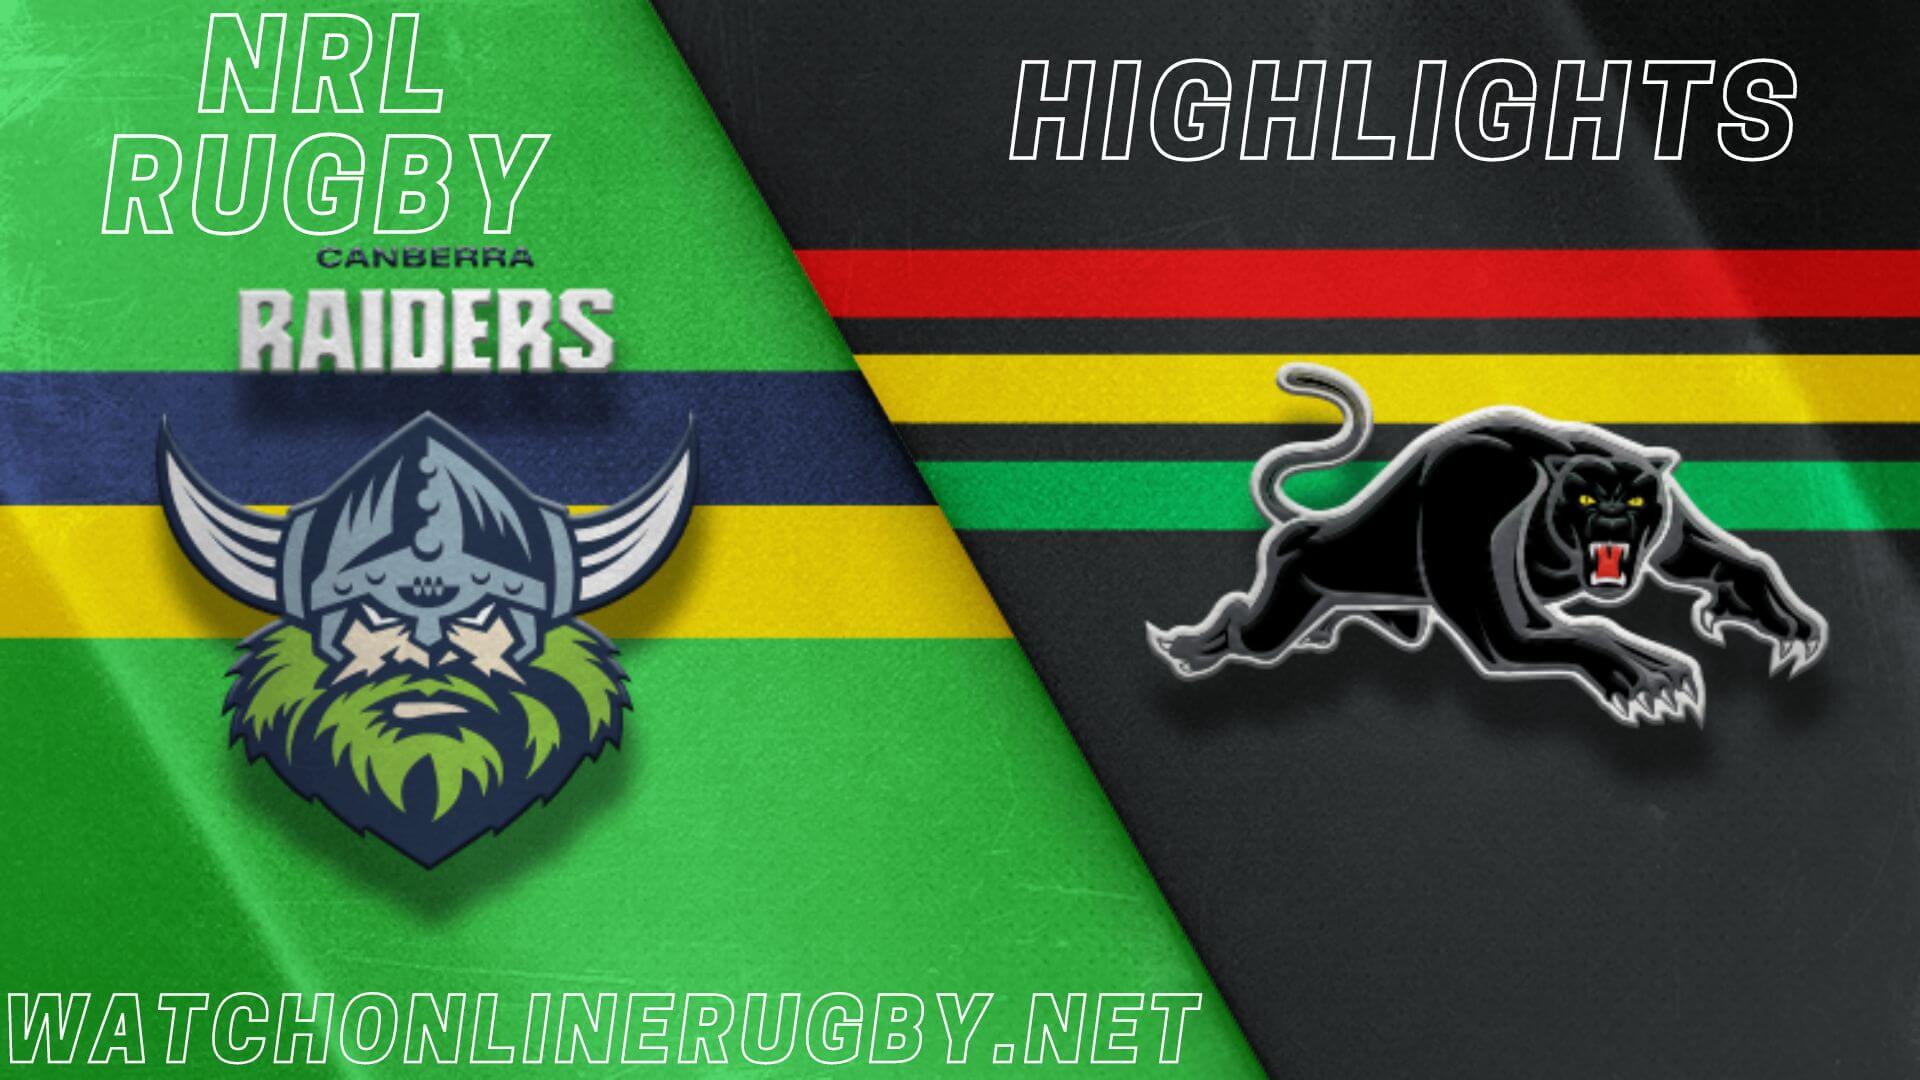 Raiders Vs Panthers Highlights RD 21 NRL Rugby